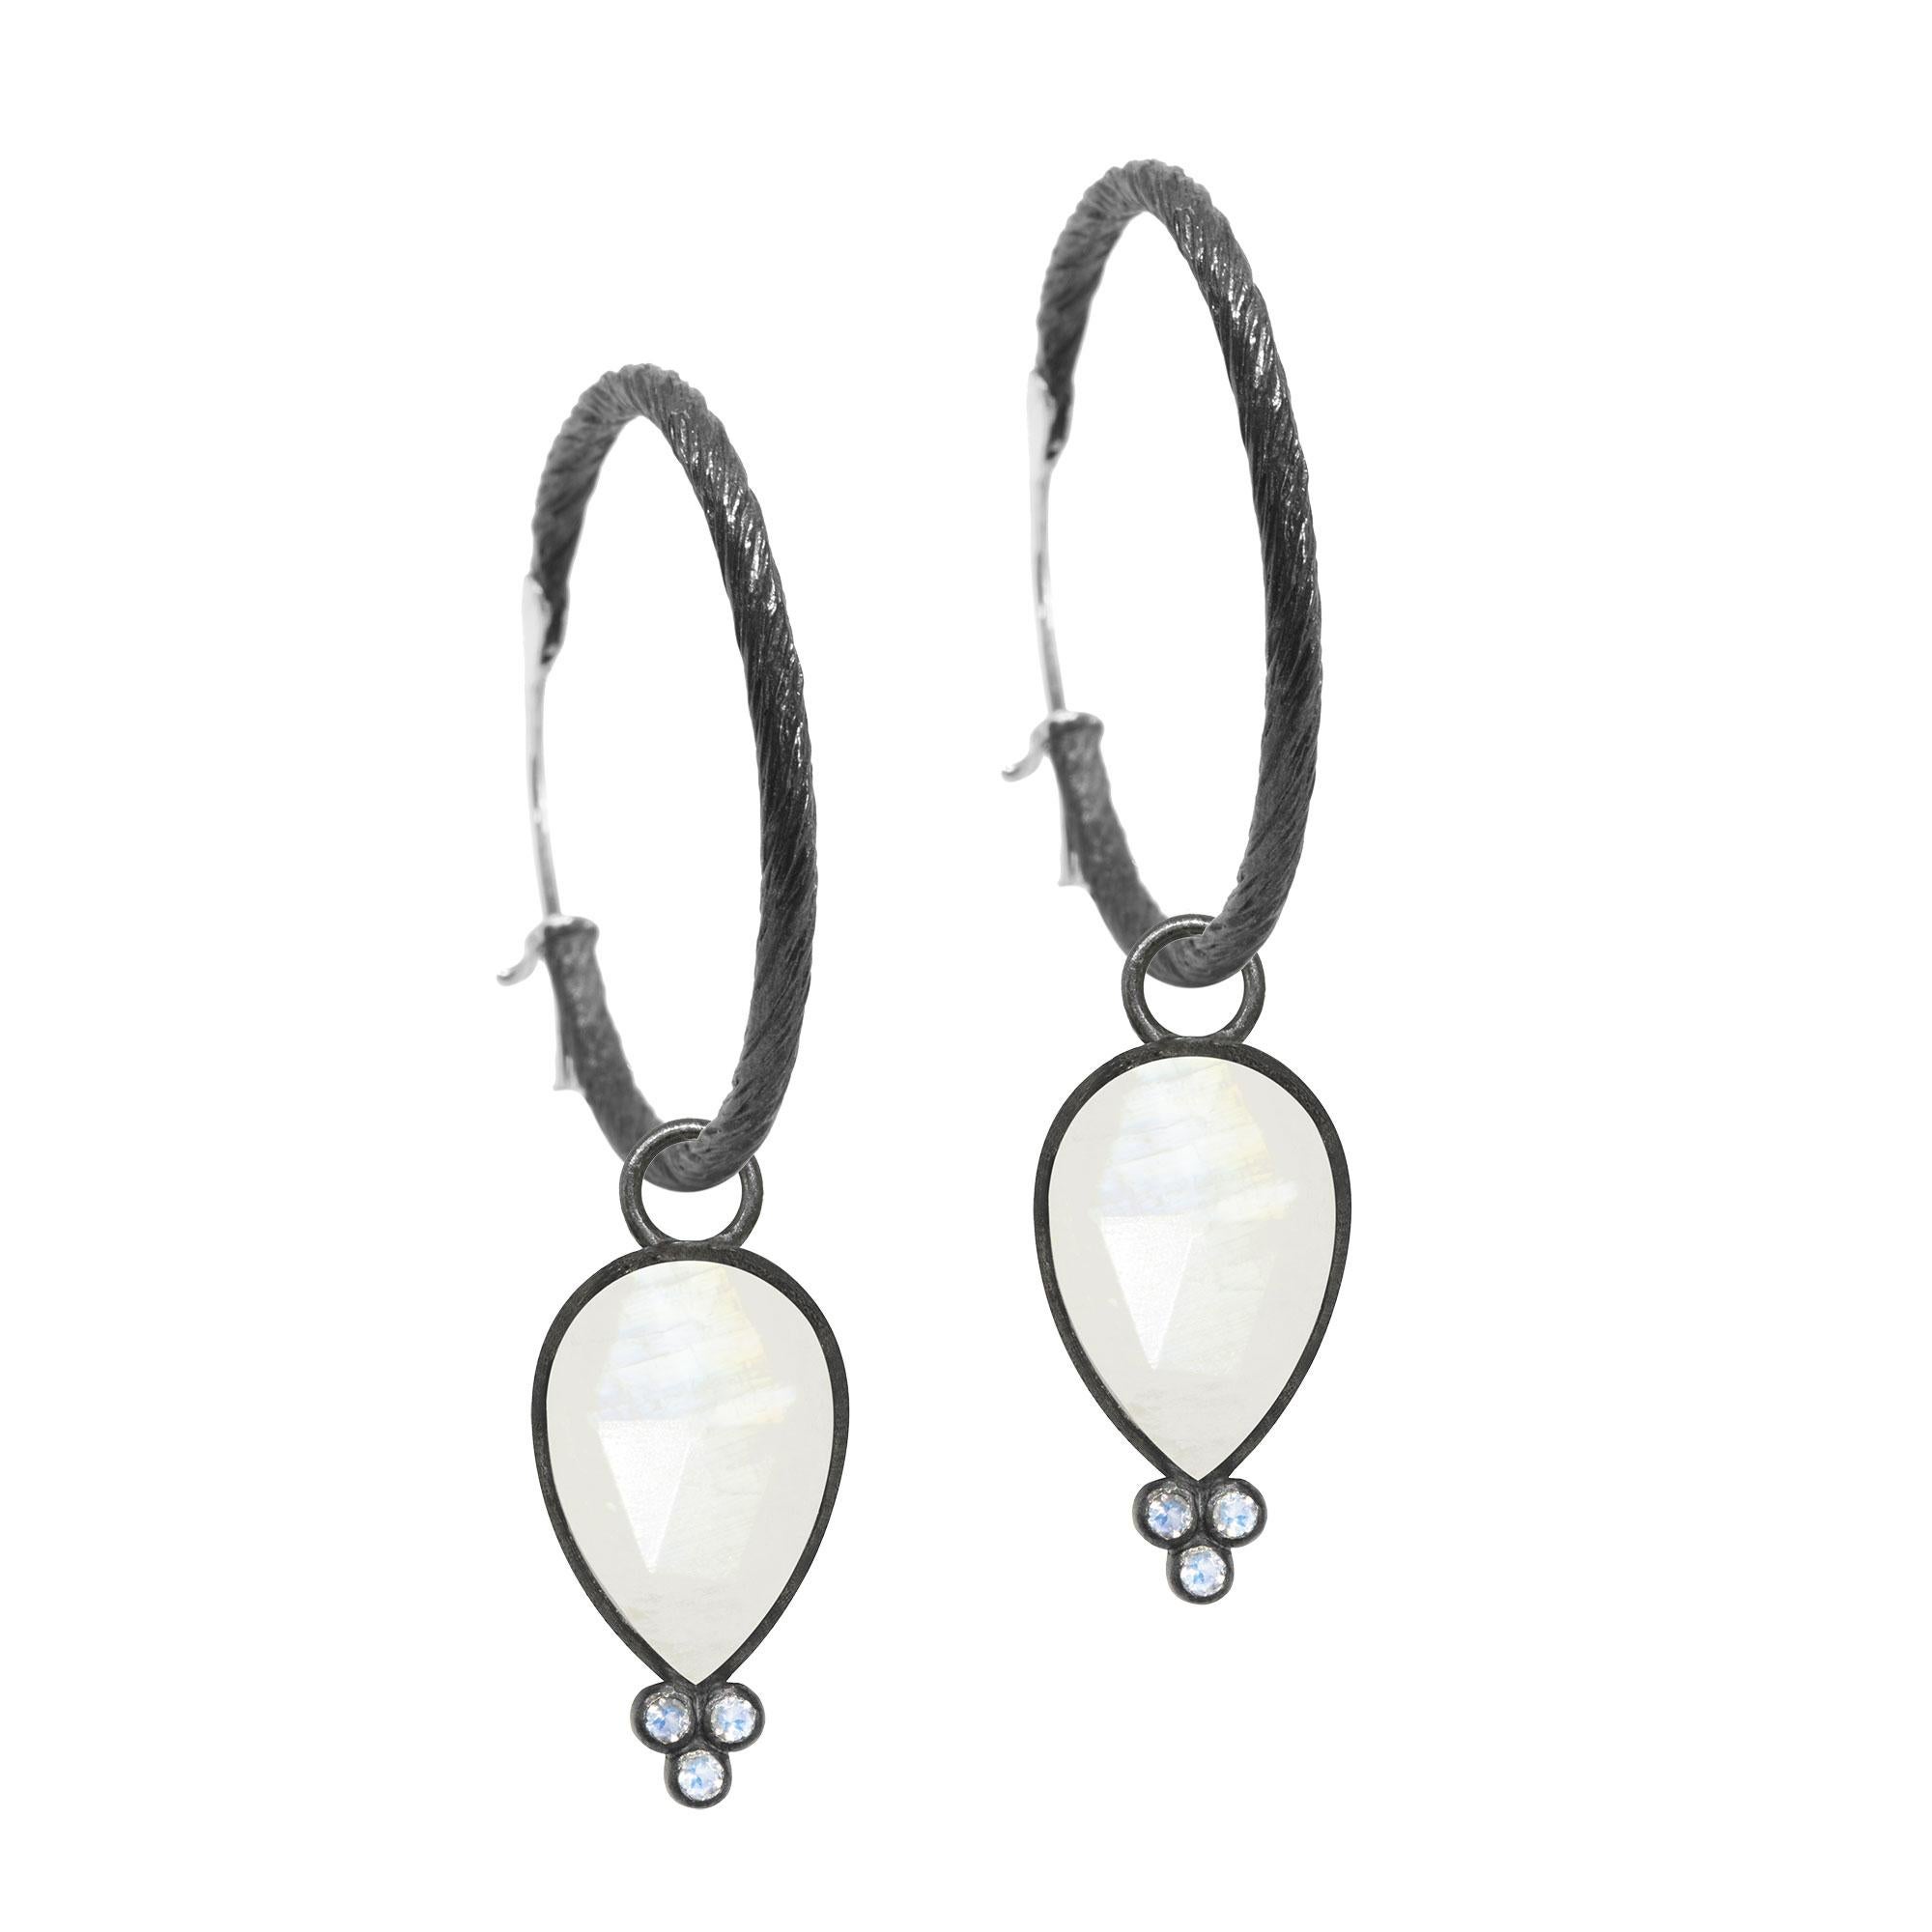 With rich, regal moonstone in a petal-like pear shape, the diamond-accented Mia Small Oxidized Charms bloom with any of our hoops and mix well with other styles.

Metal: Sterling Silver Oxidized
Stone carat: 9
Hoop size: 25mm
Stone size: